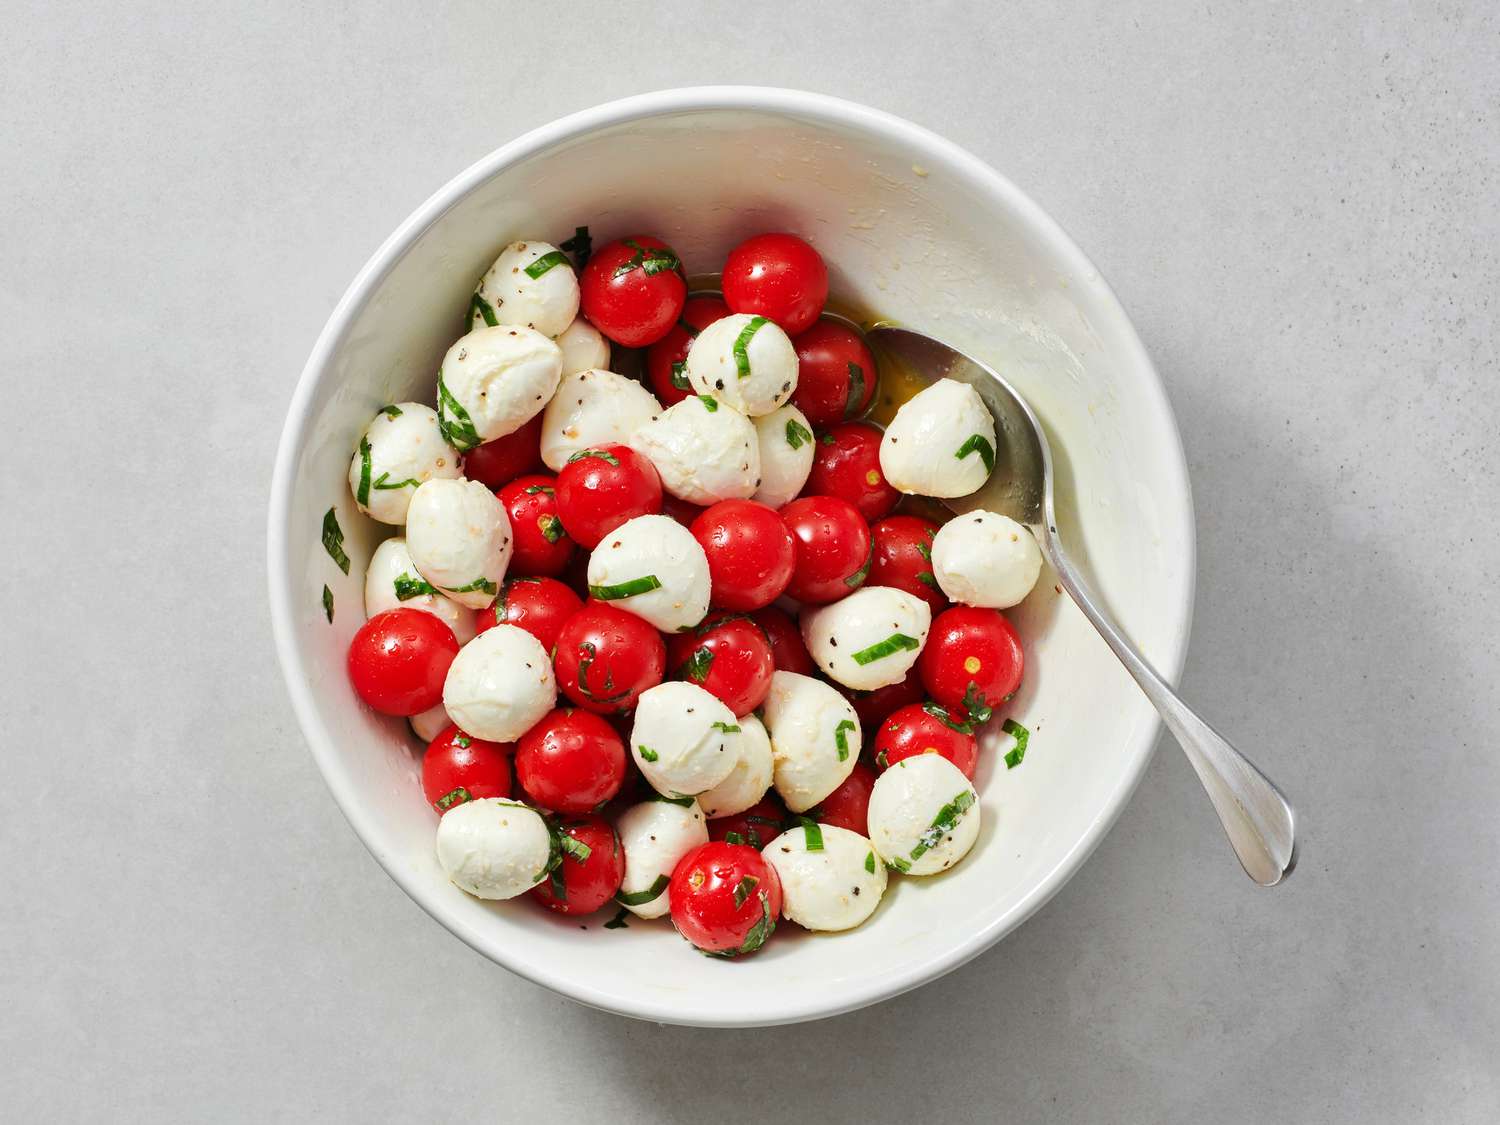 Tomatoes and vinegar tossed with mozzarella mixture mixture inside bowl